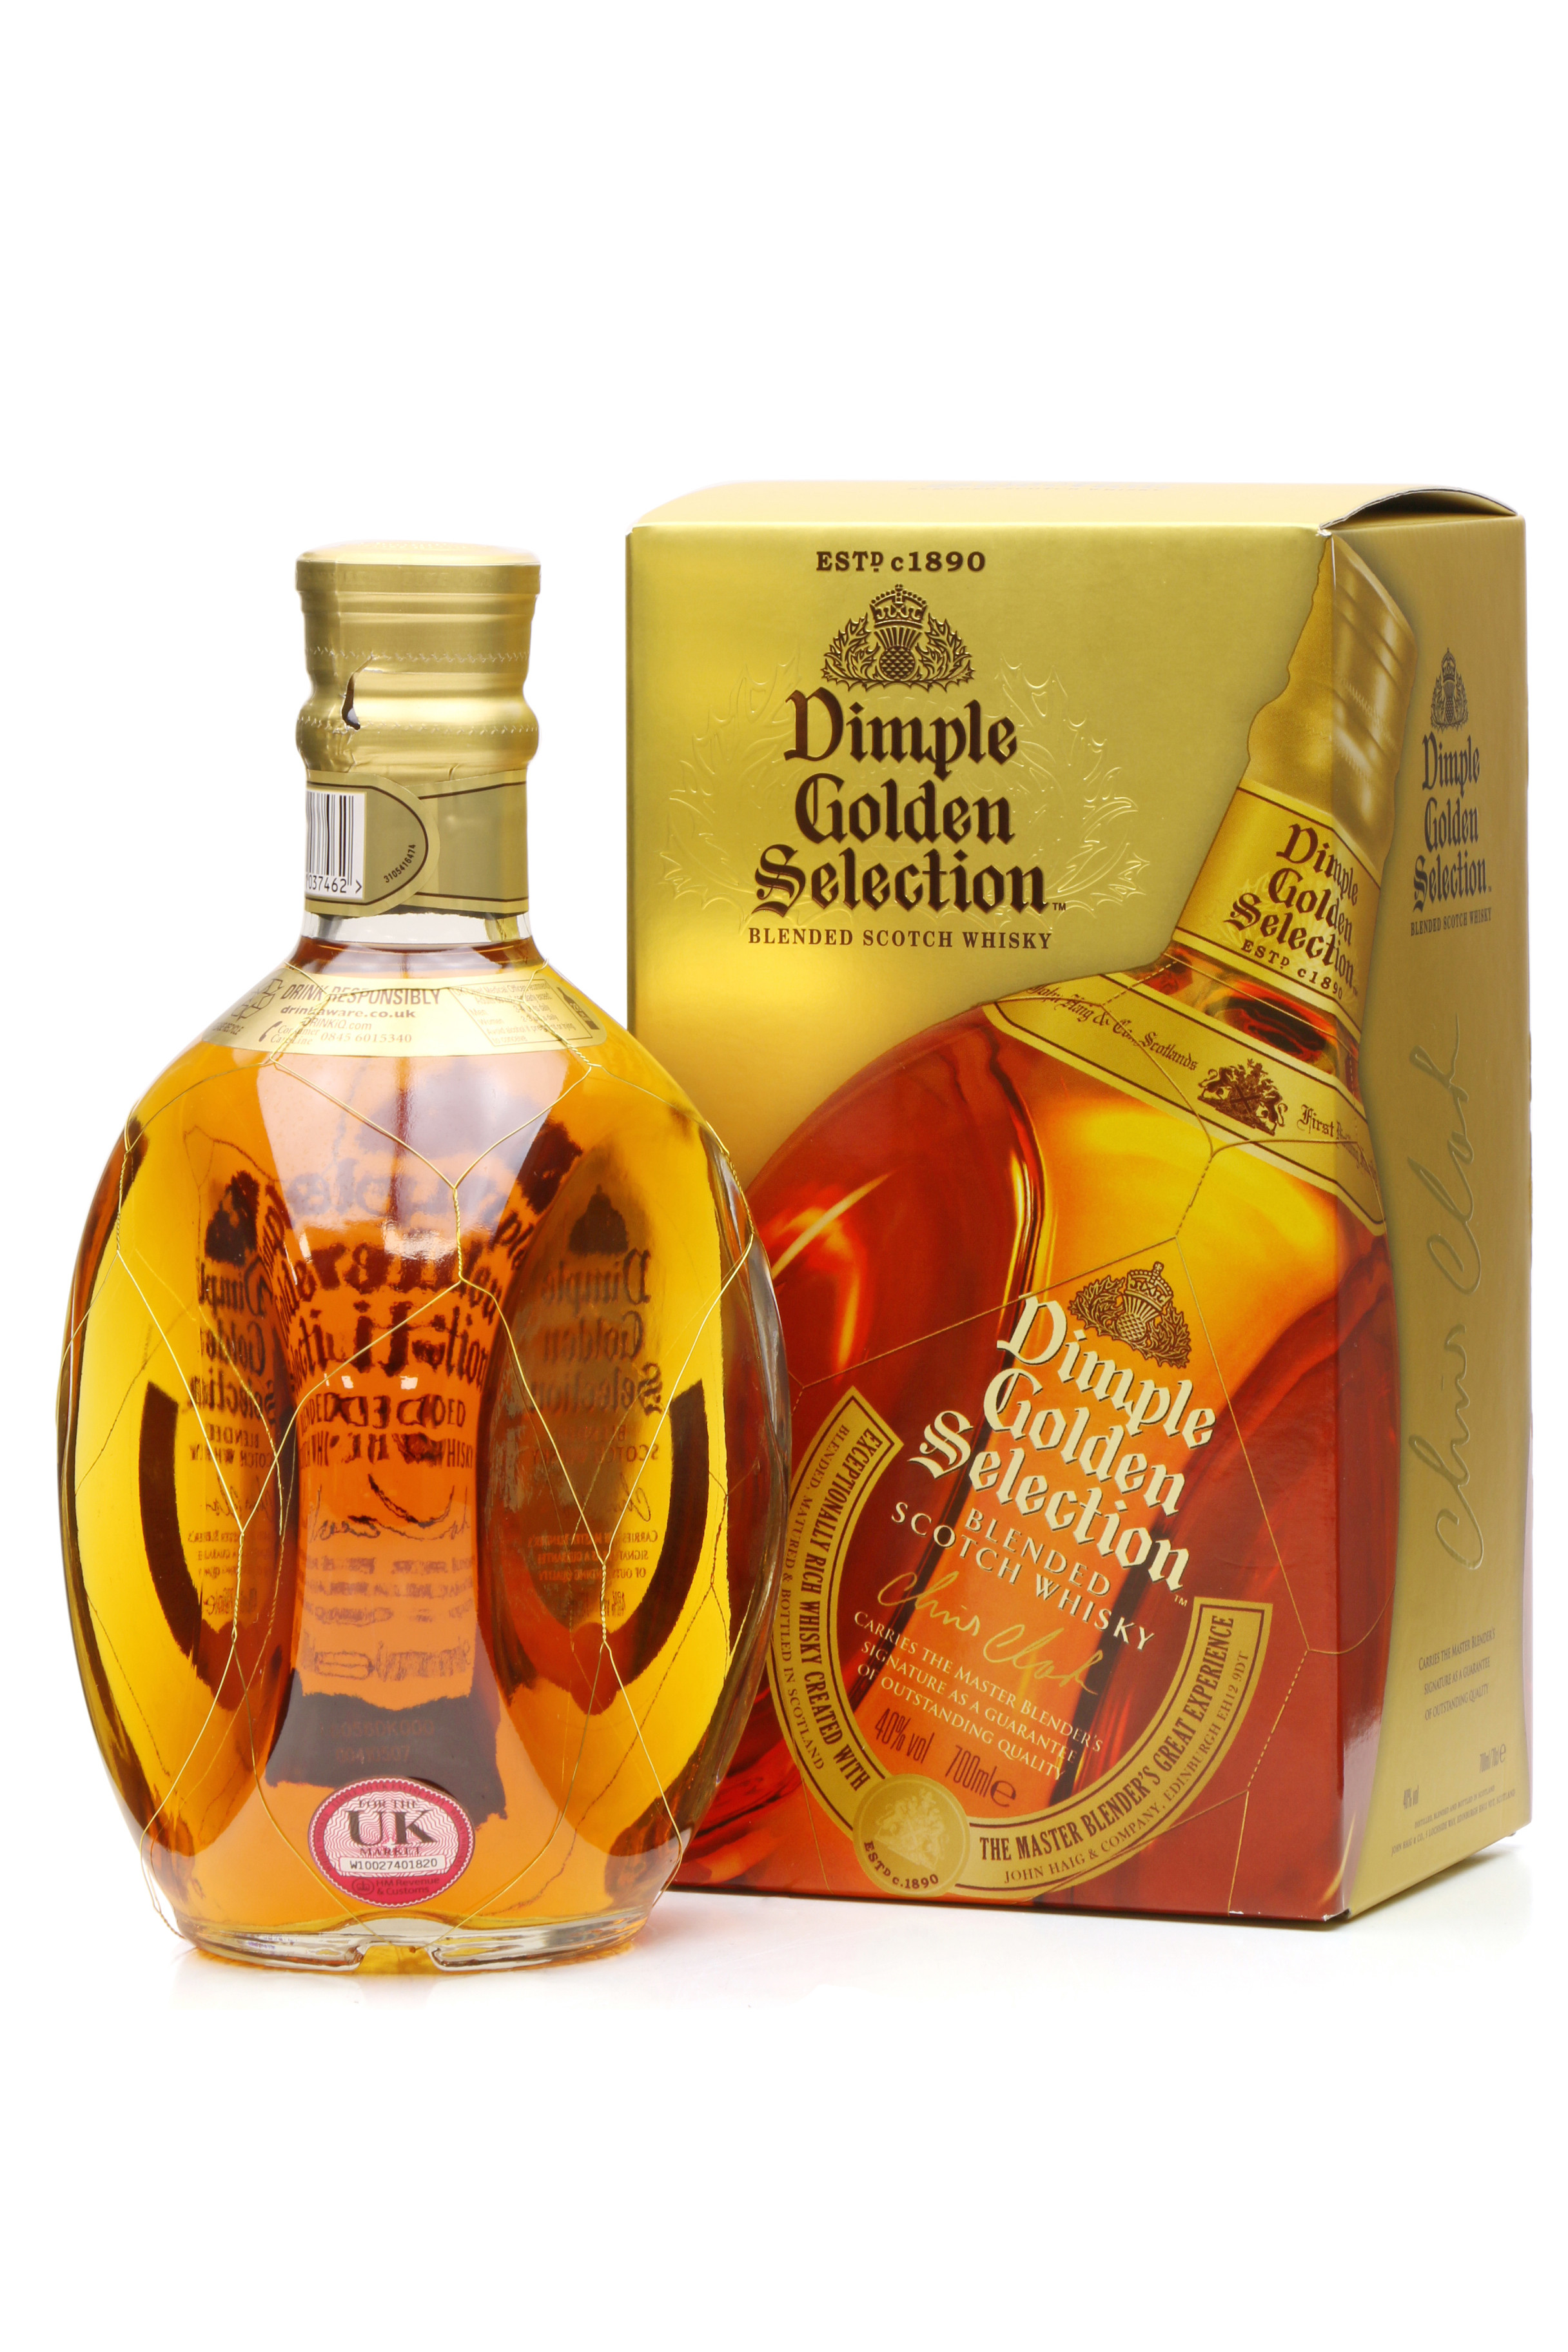 Just - Auctions Whisky Golden Dimple Selection